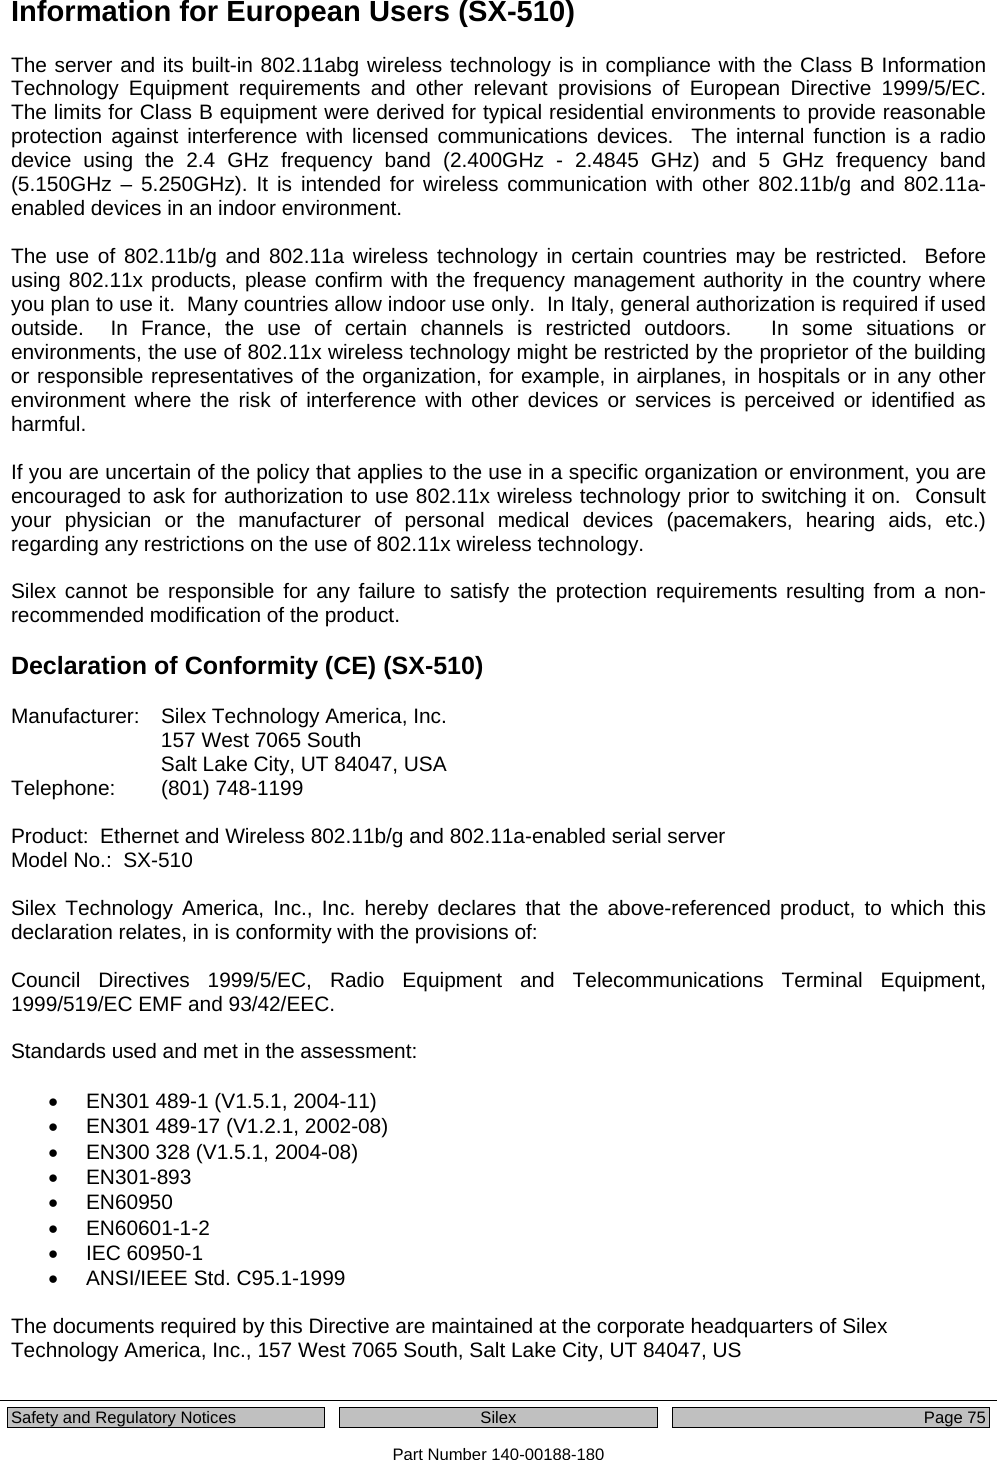  Safety and Regulatory Notices  Silex Page 75 Part Number 140-00188-180 Information for European Users (SX-510) The server and its built-in 802.11abg wireless technology is in compliance with the Class B Information Technology Equipment requirements and other relevant provisions of European Directive 1999/5/EC.  The limits for Class B equipment were derived for typical residential environments to provide reasonable protection against interference with licensed communications devices.  The internal function is a radio device using the 2.4 GHz frequency band (2.400GHz - 2.4845 GHz) and 5 GHz frequency band (5.150GHz – 5.250GHz). It is intended for wireless communication with other 802.11b/g and 802.11a-enabled devices in an indoor environment.  The use of 802.11b/g and 802.11a wireless technology in certain countries may be restricted.  Before using 802.11x products, please confirm with the frequency management authority in the country where you plan to use it.  Many countries allow indoor use only.  In Italy, general authorization is required if used outside.  In France, the use of certain channels is restricted outdoors.   In some situations or environments, the use of 802.11x wireless technology might be restricted by the proprietor of the building or responsible representatives of the organization, for example, in airplanes, in hospitals or in any other environment where the risk of interference with other devices or services is perceived or identified as harmful.  If you are uncertain of the policy that applies to the use in a specific organization or environment, you are encouraged to ask for authorization to use 802.11x wireless technology prior to switching it on.  Consult your physician or the manufacturer of personal medical devices (pacemakers, hearing aids, etc.) regarding any restrictions on the use of 802.11x wireless technology.  Silex cannot be responsible for any failure to satisfy the protection requirements resulting from a non-recommended modification of the product.  Declaration of Conformity (CE) (SX-510)  Manufacturer:    Silex Technology America, Inc. 157 West 7065 South Salt Lake City, UT 84047, USA Telephone:   (801) 748-1199  Product:  Ethernet and Wireless 802.11b/g and 802.11a-enabled serial server Model No.:  SX-510   Silex Technology America, Inc., Inc. hereby declares that the above-referenced product, to which this declaration relates, in is conformity with the provisions of:  Council Directives 1999/5/EC, Radio Equipment and Telecommunications Terminal Equipment, 1999/519/EC EMF and 93/42/EEC.  Standards used and met in the assessment:  •  EN301 489-1 (V1.5.1, 2004-11) •  EN301 489-17 (V1.2.1, 2002-08) •  EN300 328 (V1.5.1, 2004-08)  • EN301-893 • EN60950 • EN60601-1-2 • IEC 60950-1 • ANSI/IEEE Std. C95.1-1999  The documents required by this Directive are maintained at the corporate headquarters of Silex Technology America, Inc., 157 West 7065 South, Salt Lake City, UT 84047, US  